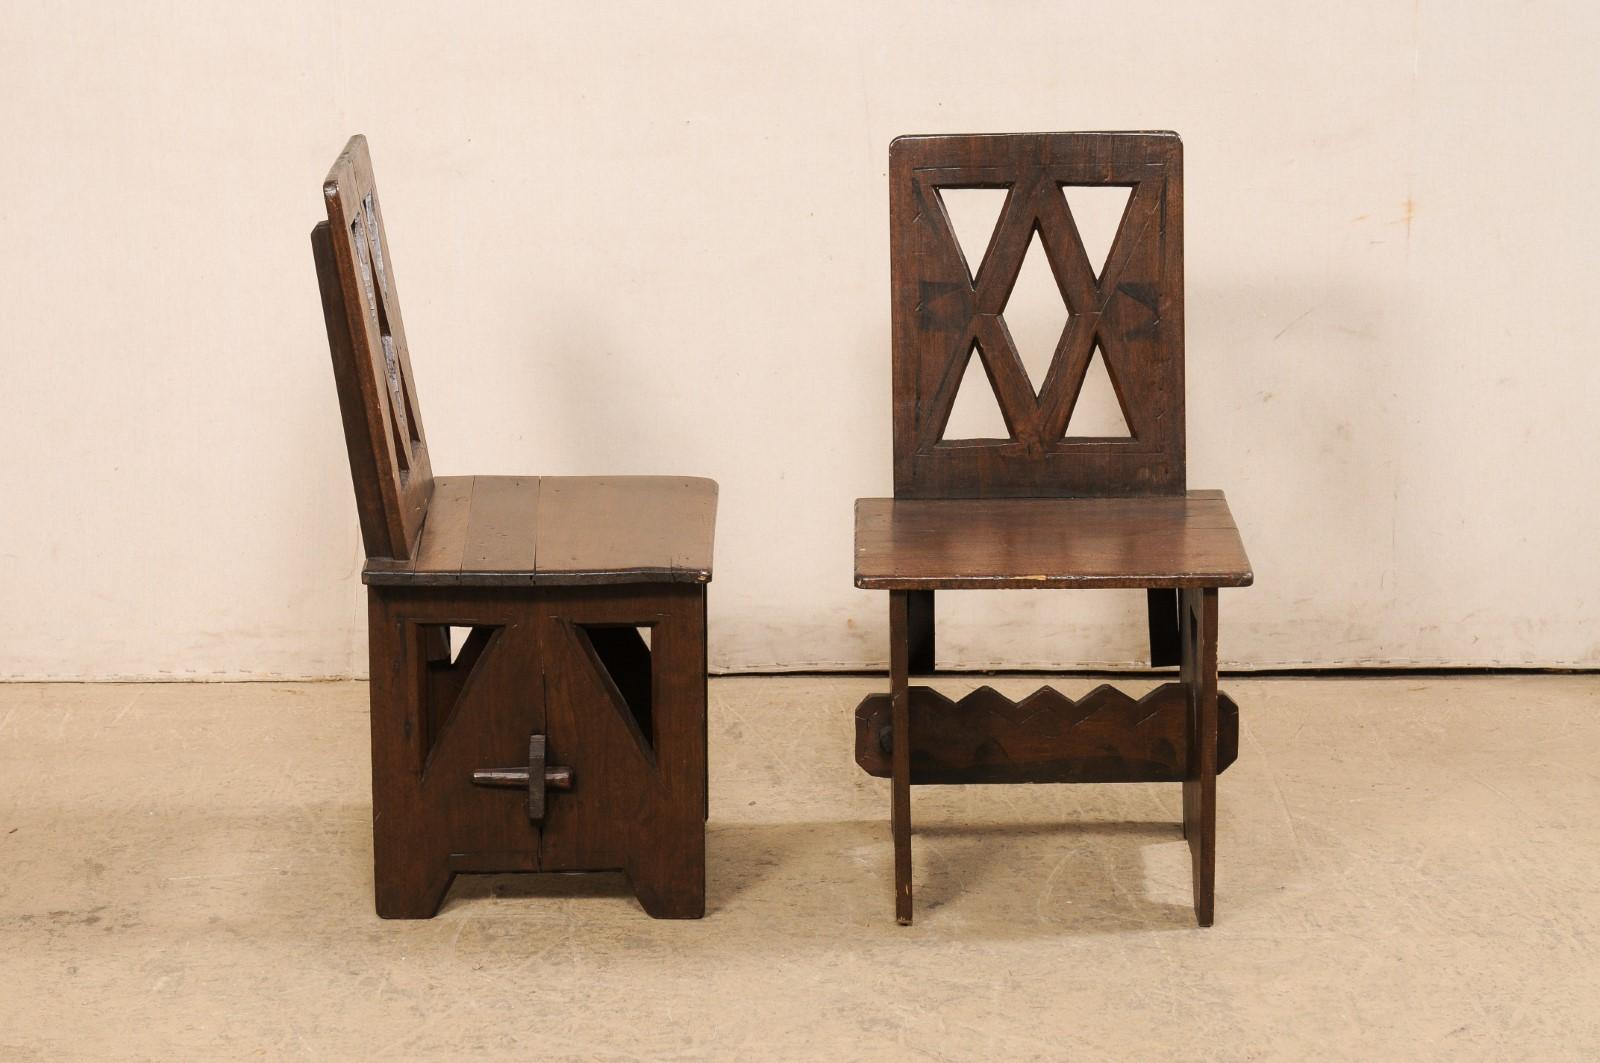 20th Century Interesting Pair of Carved Fire-Side Chairs W/Geometric Cut-Outs, N. Africa